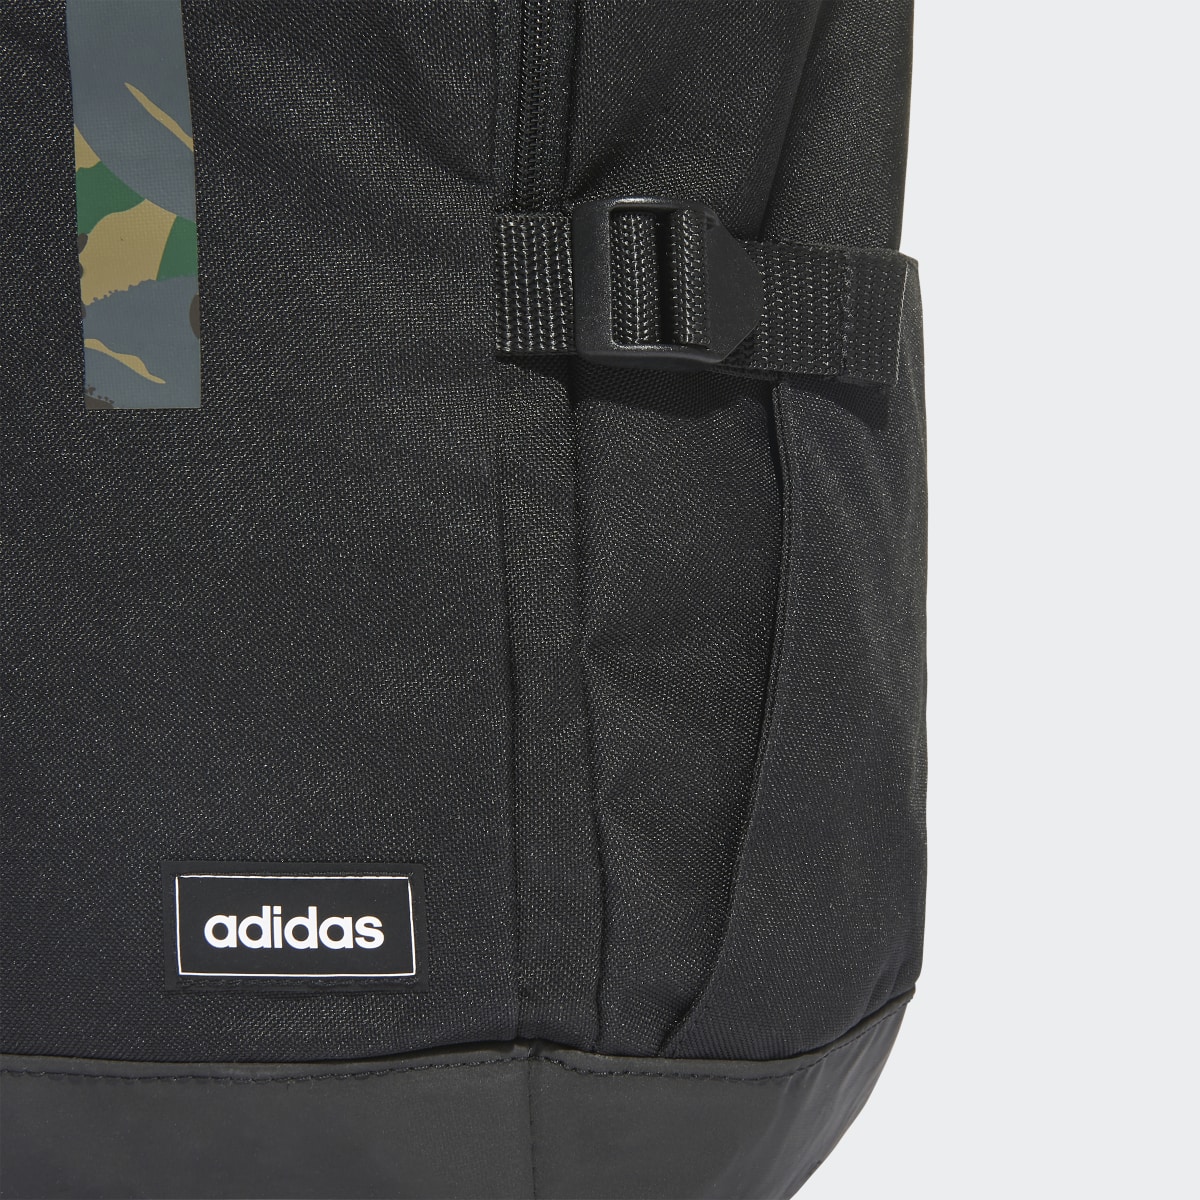 Adidas Classic Response Camouflage Backpack. 7